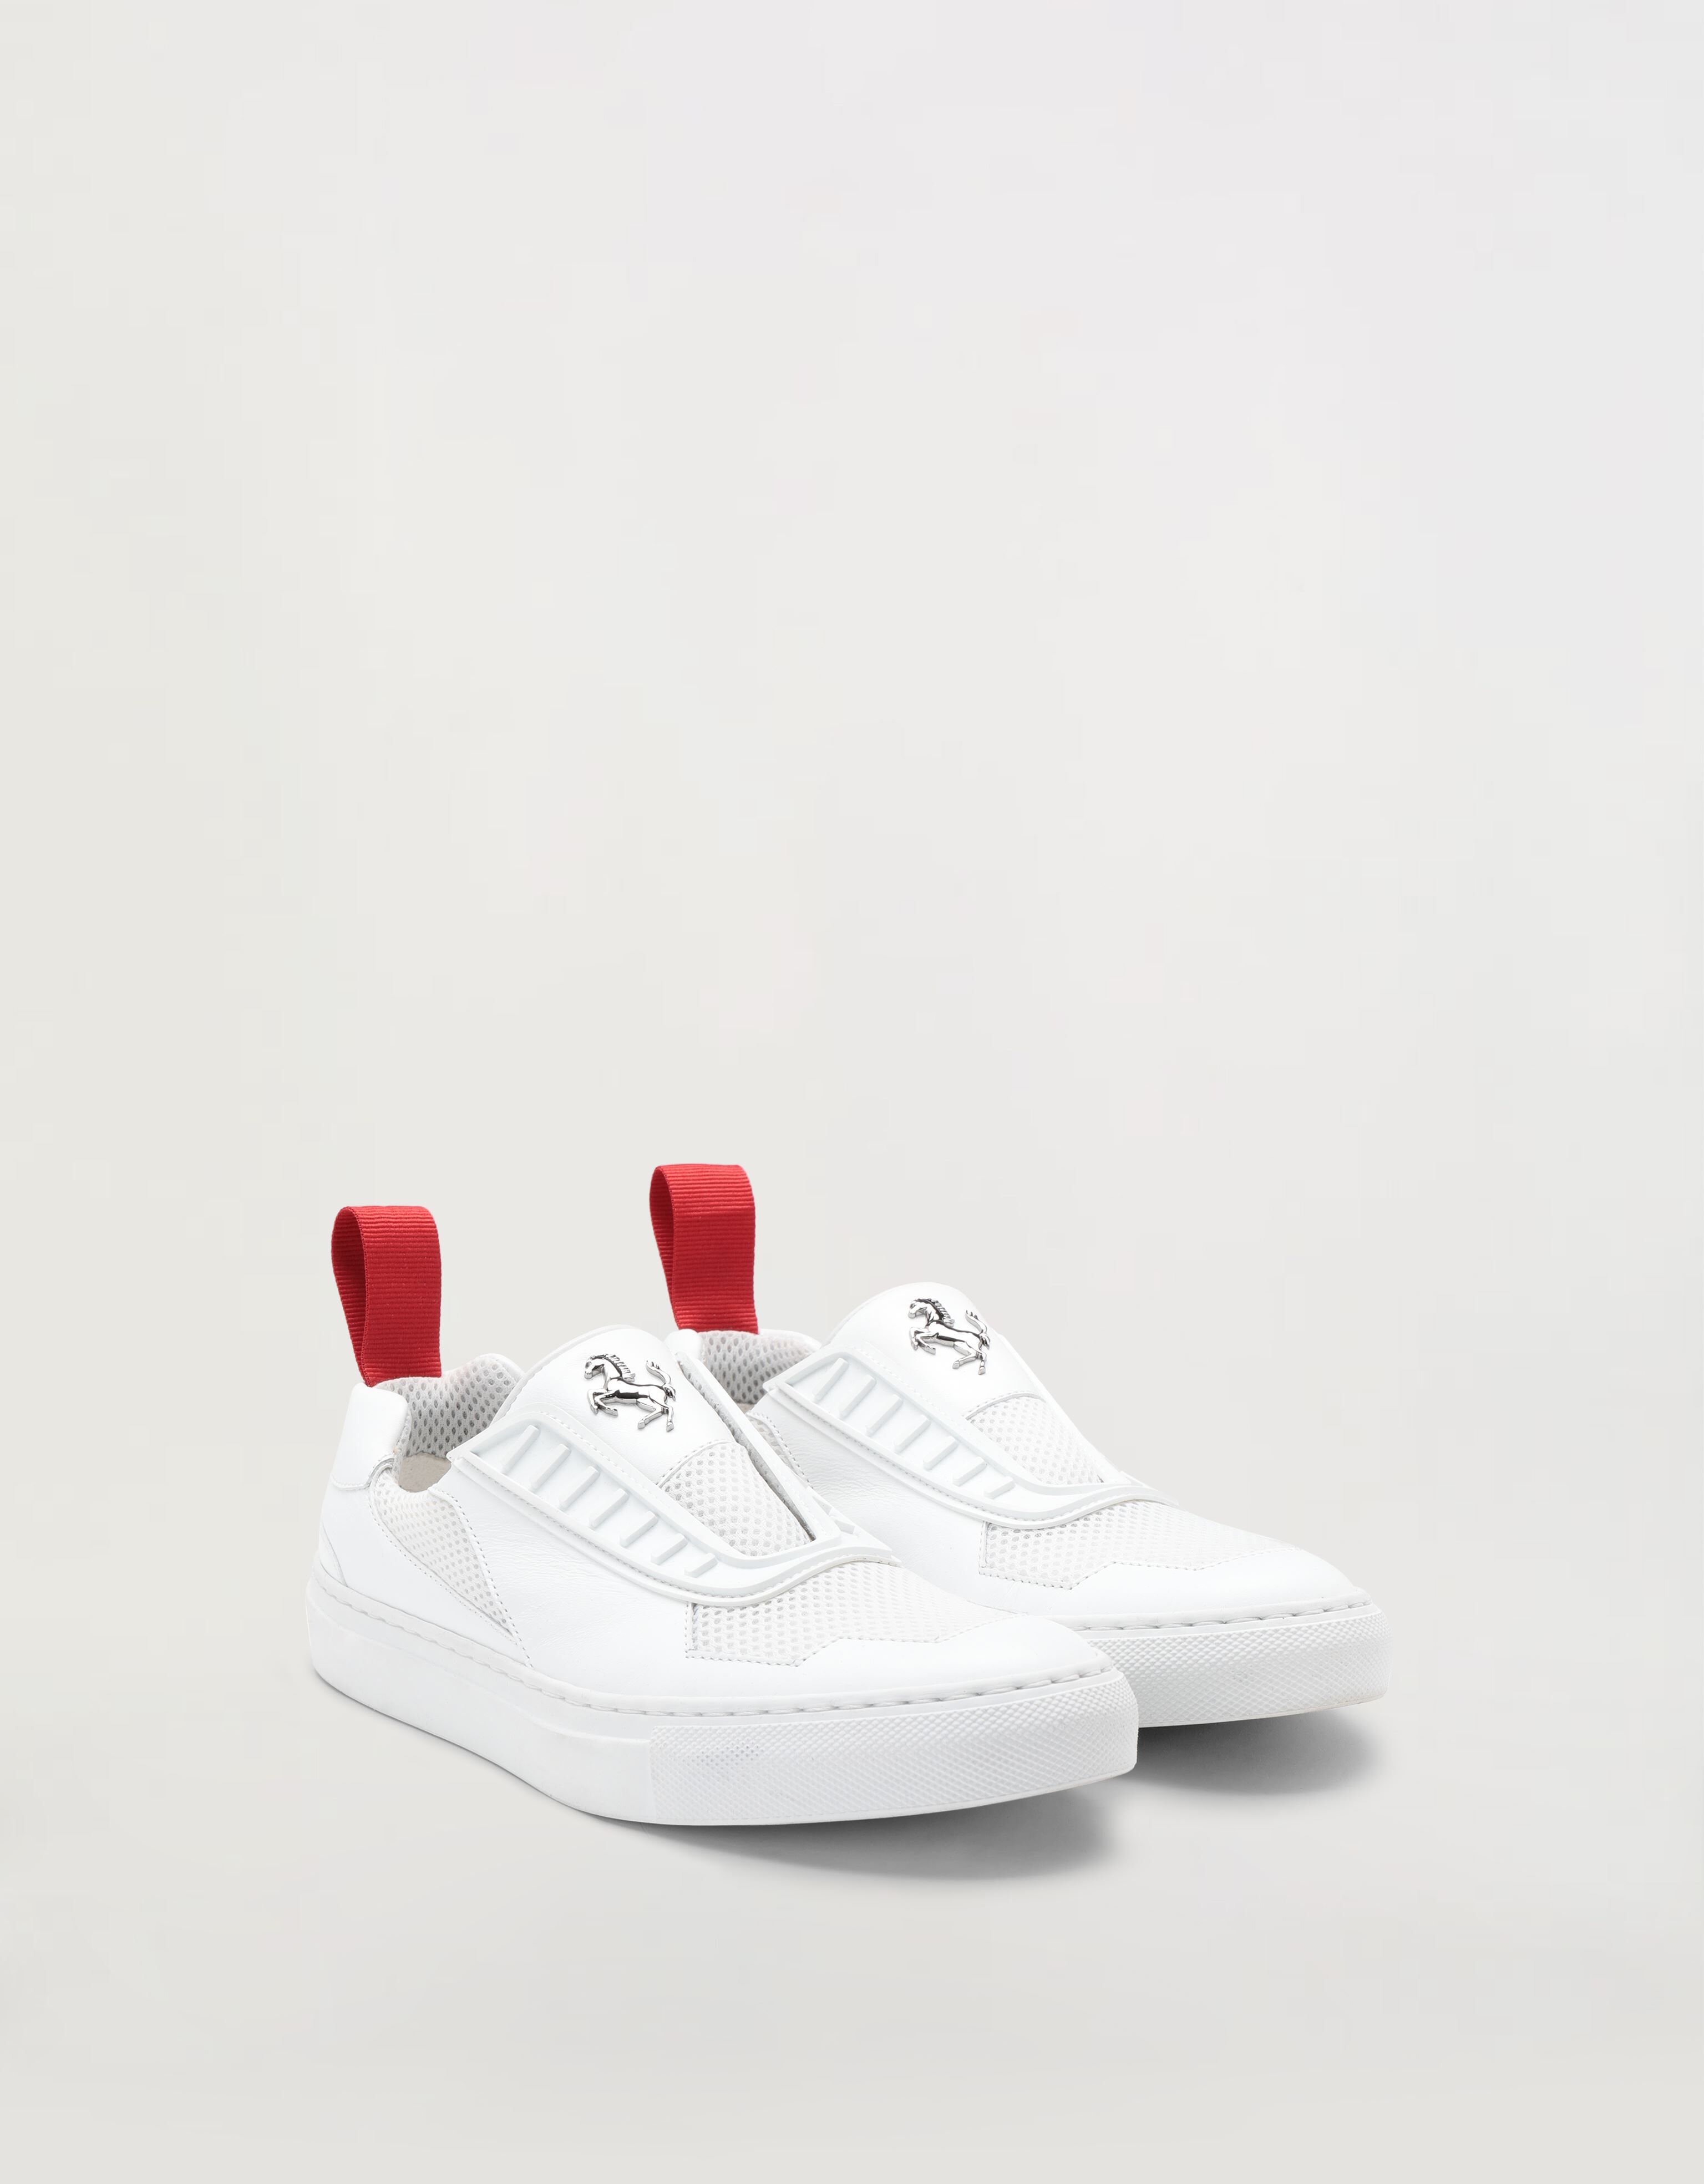 Ferrari Women's slip-on leather trainers featuring the Prancing Horse Optical White 47104f